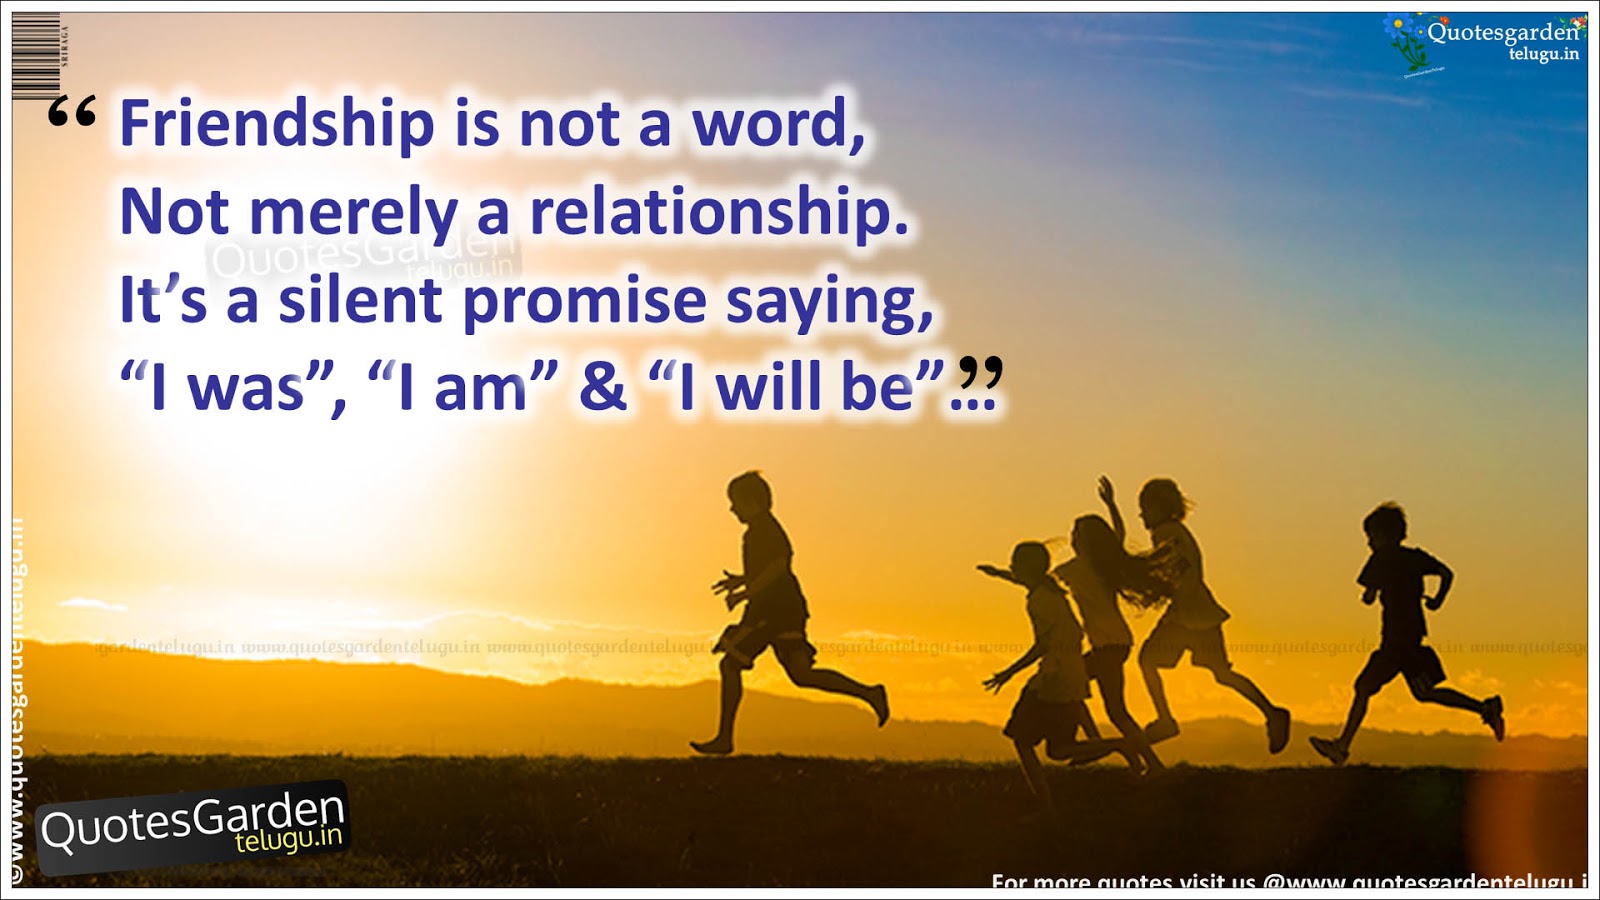 Nice Friendship Quotes HD wallpapers | QUOTES GARDEN TELUGU ...